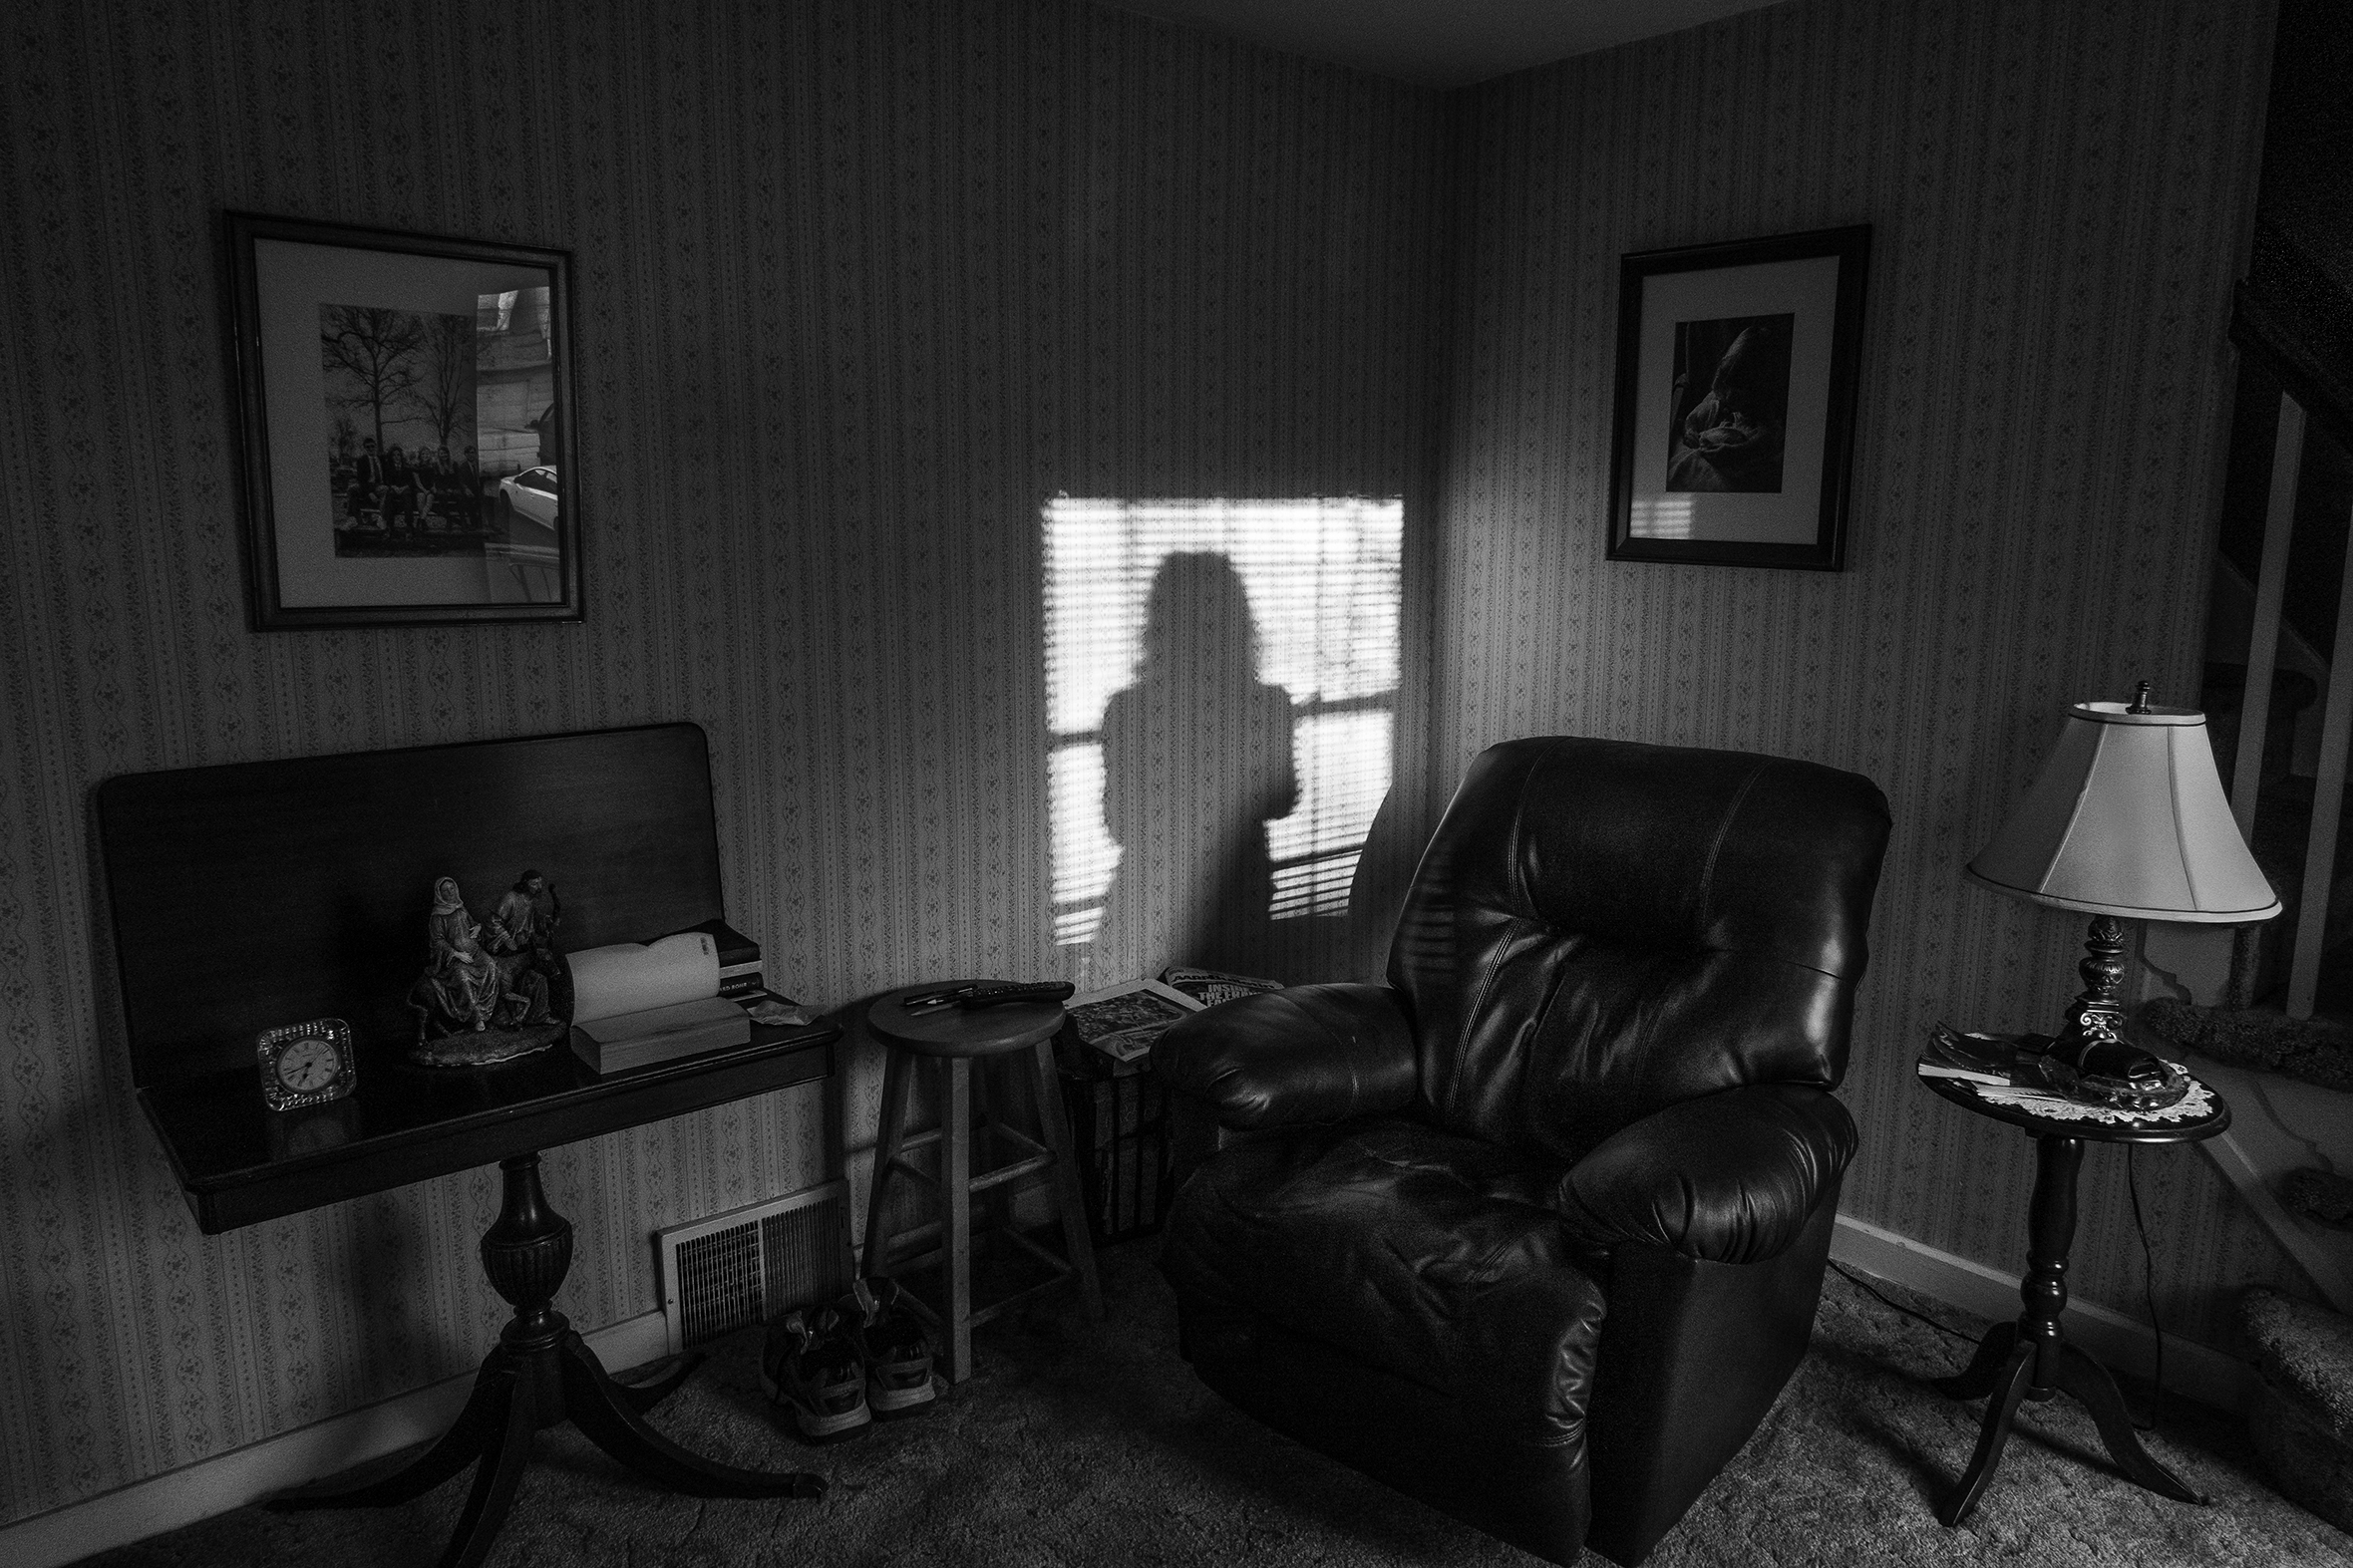 A living room domiated by an empty leather recliner. A woman stands in front of a window looking out.